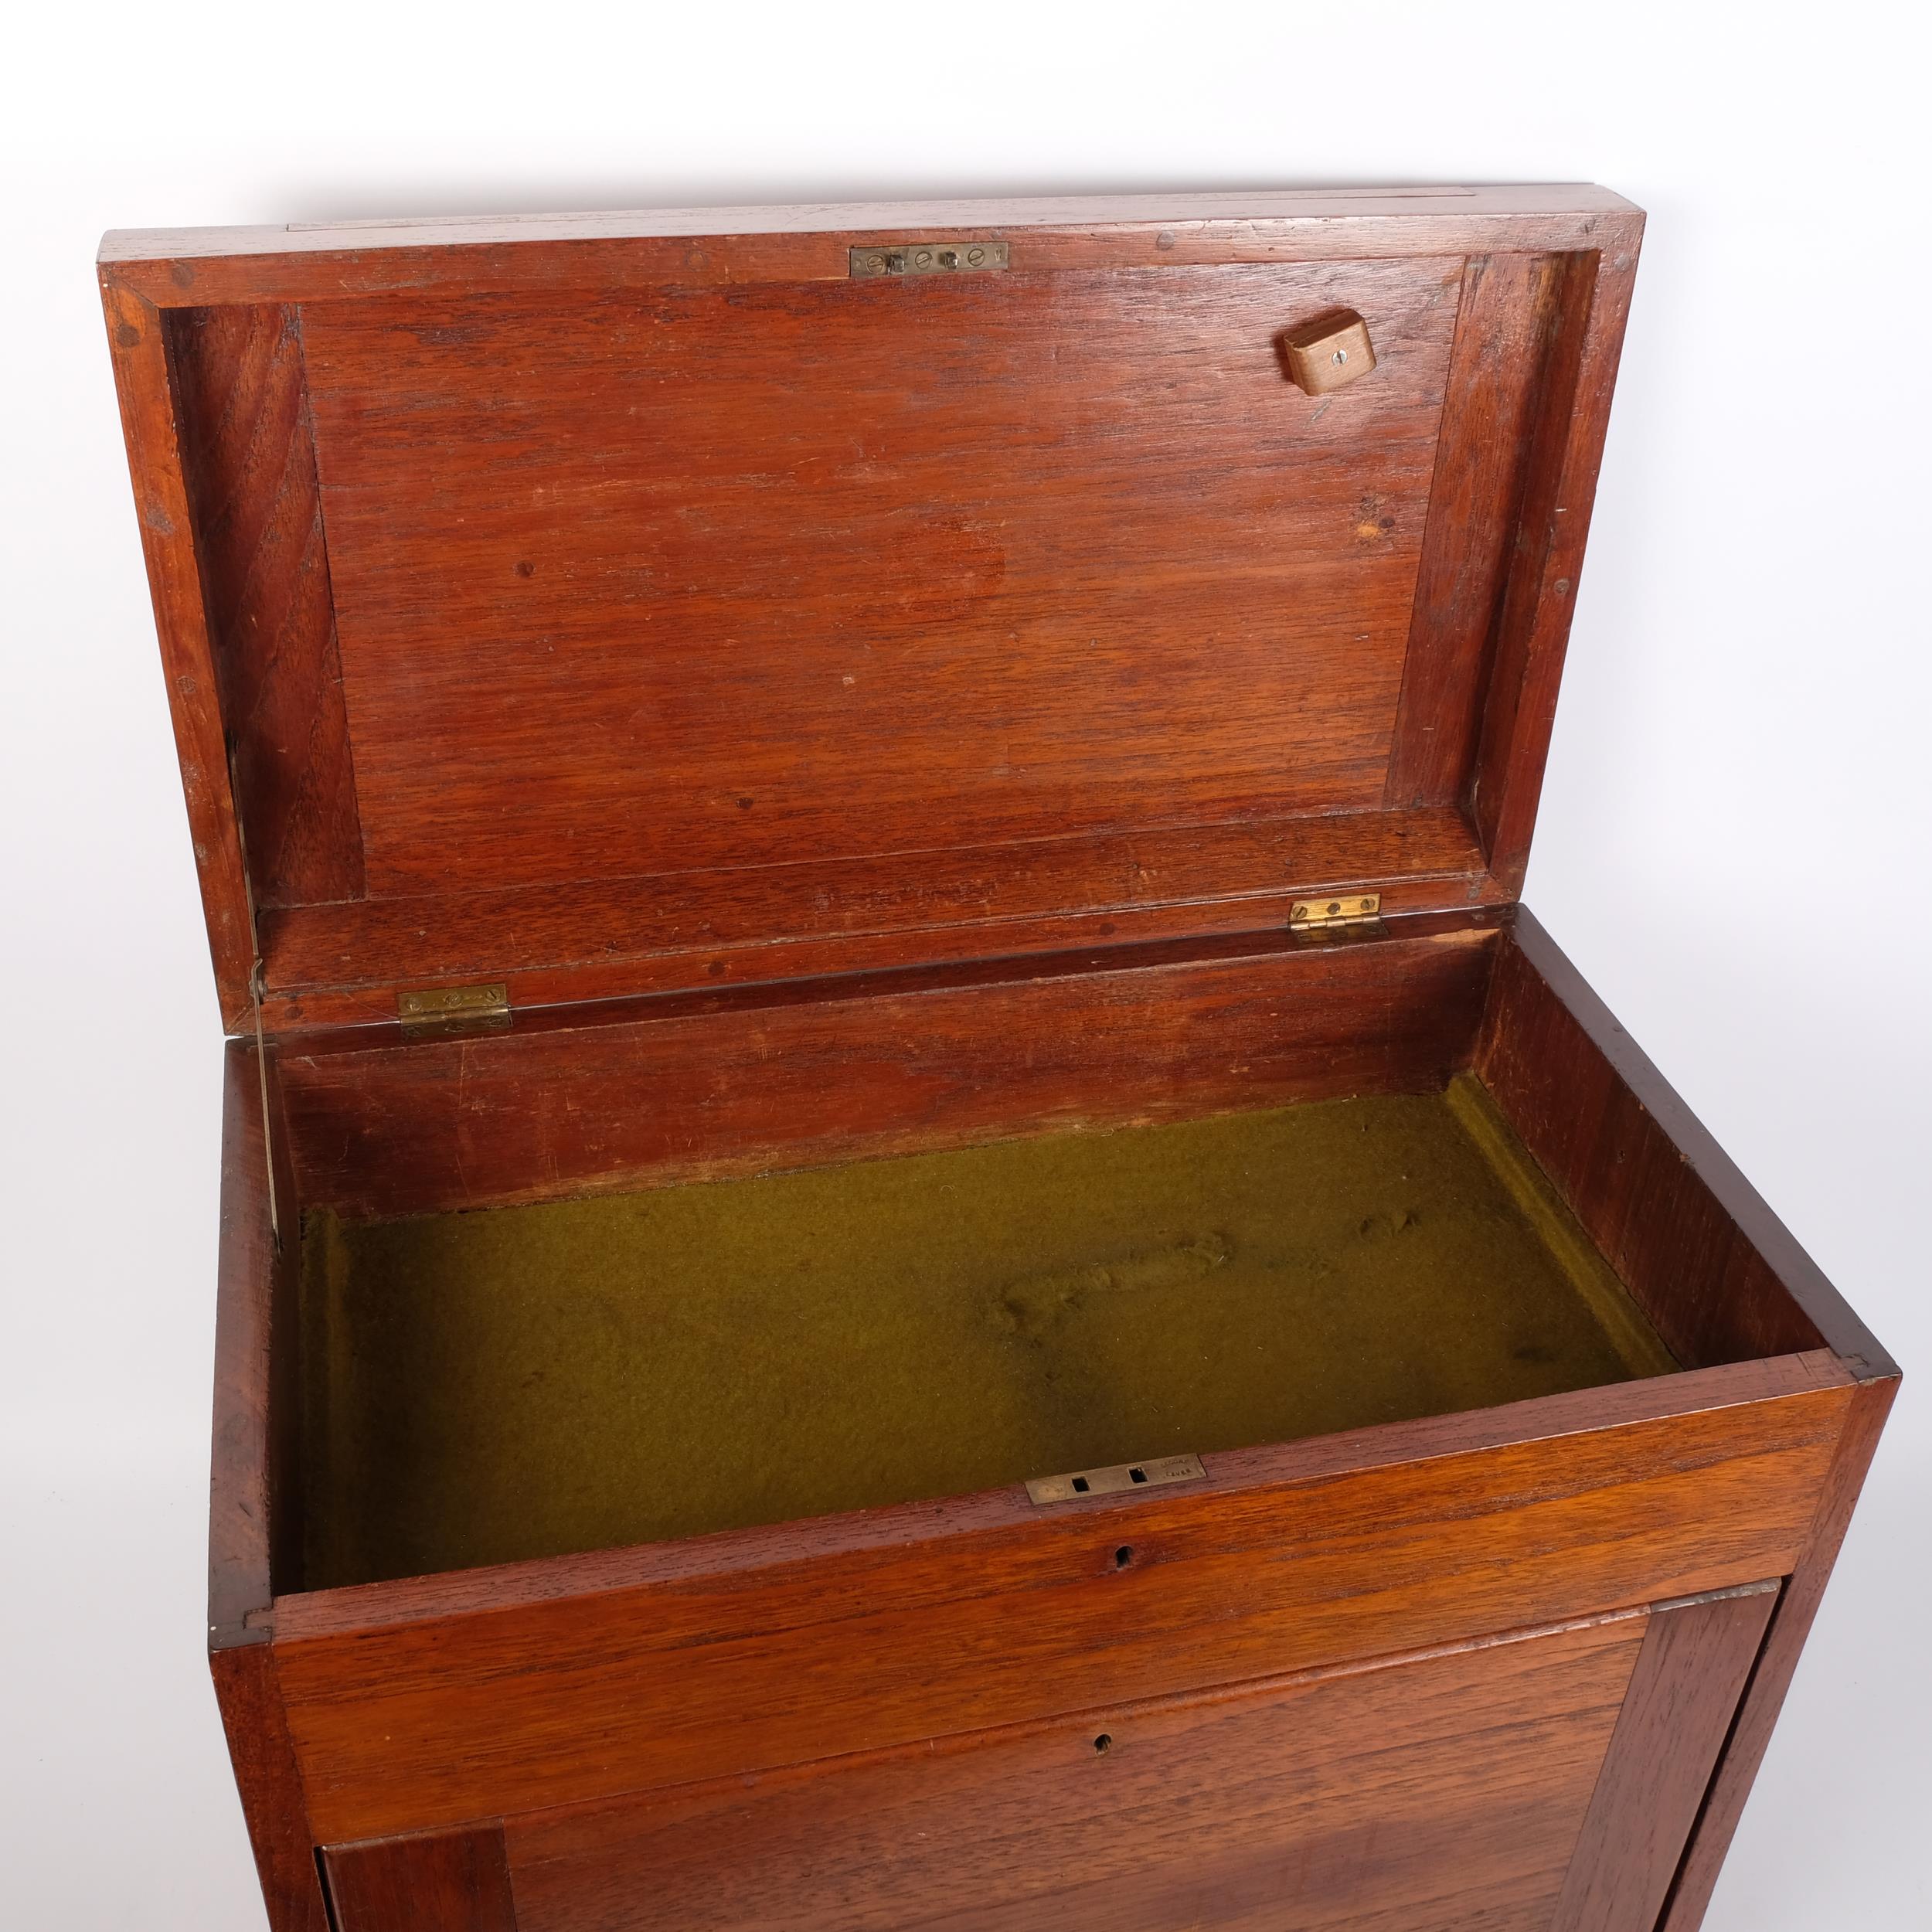 A engineer's teak toolbox, with rising lid and 3 fitted drawers, 50cm x 43cm x 28cm - Image 2 of 2